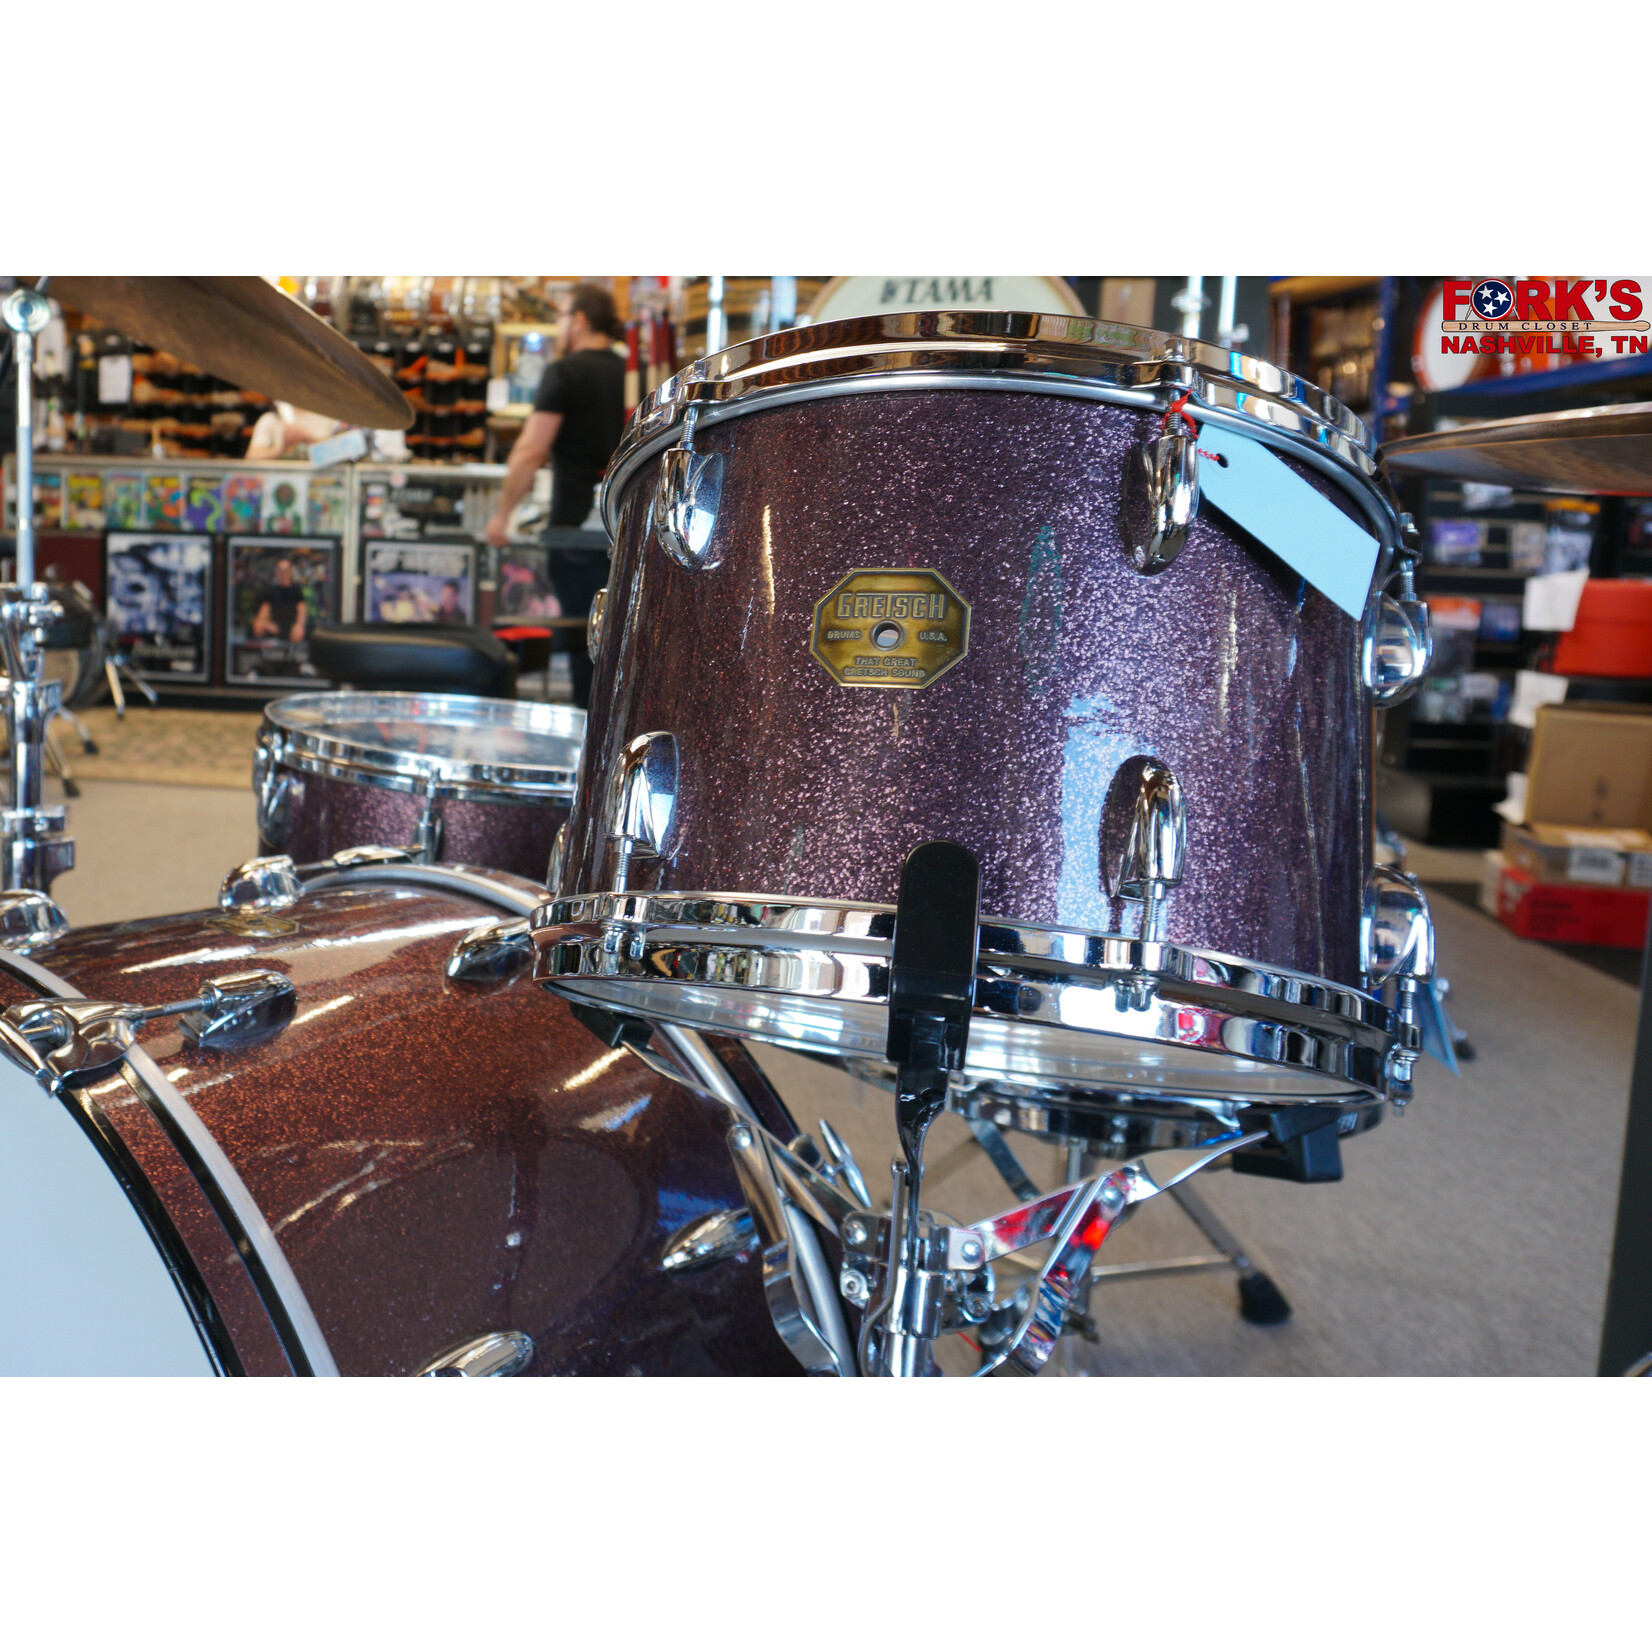 Gretsch Used Gretsch Central 3pc Drum Kit - "Dr. Pepper Sparkle"